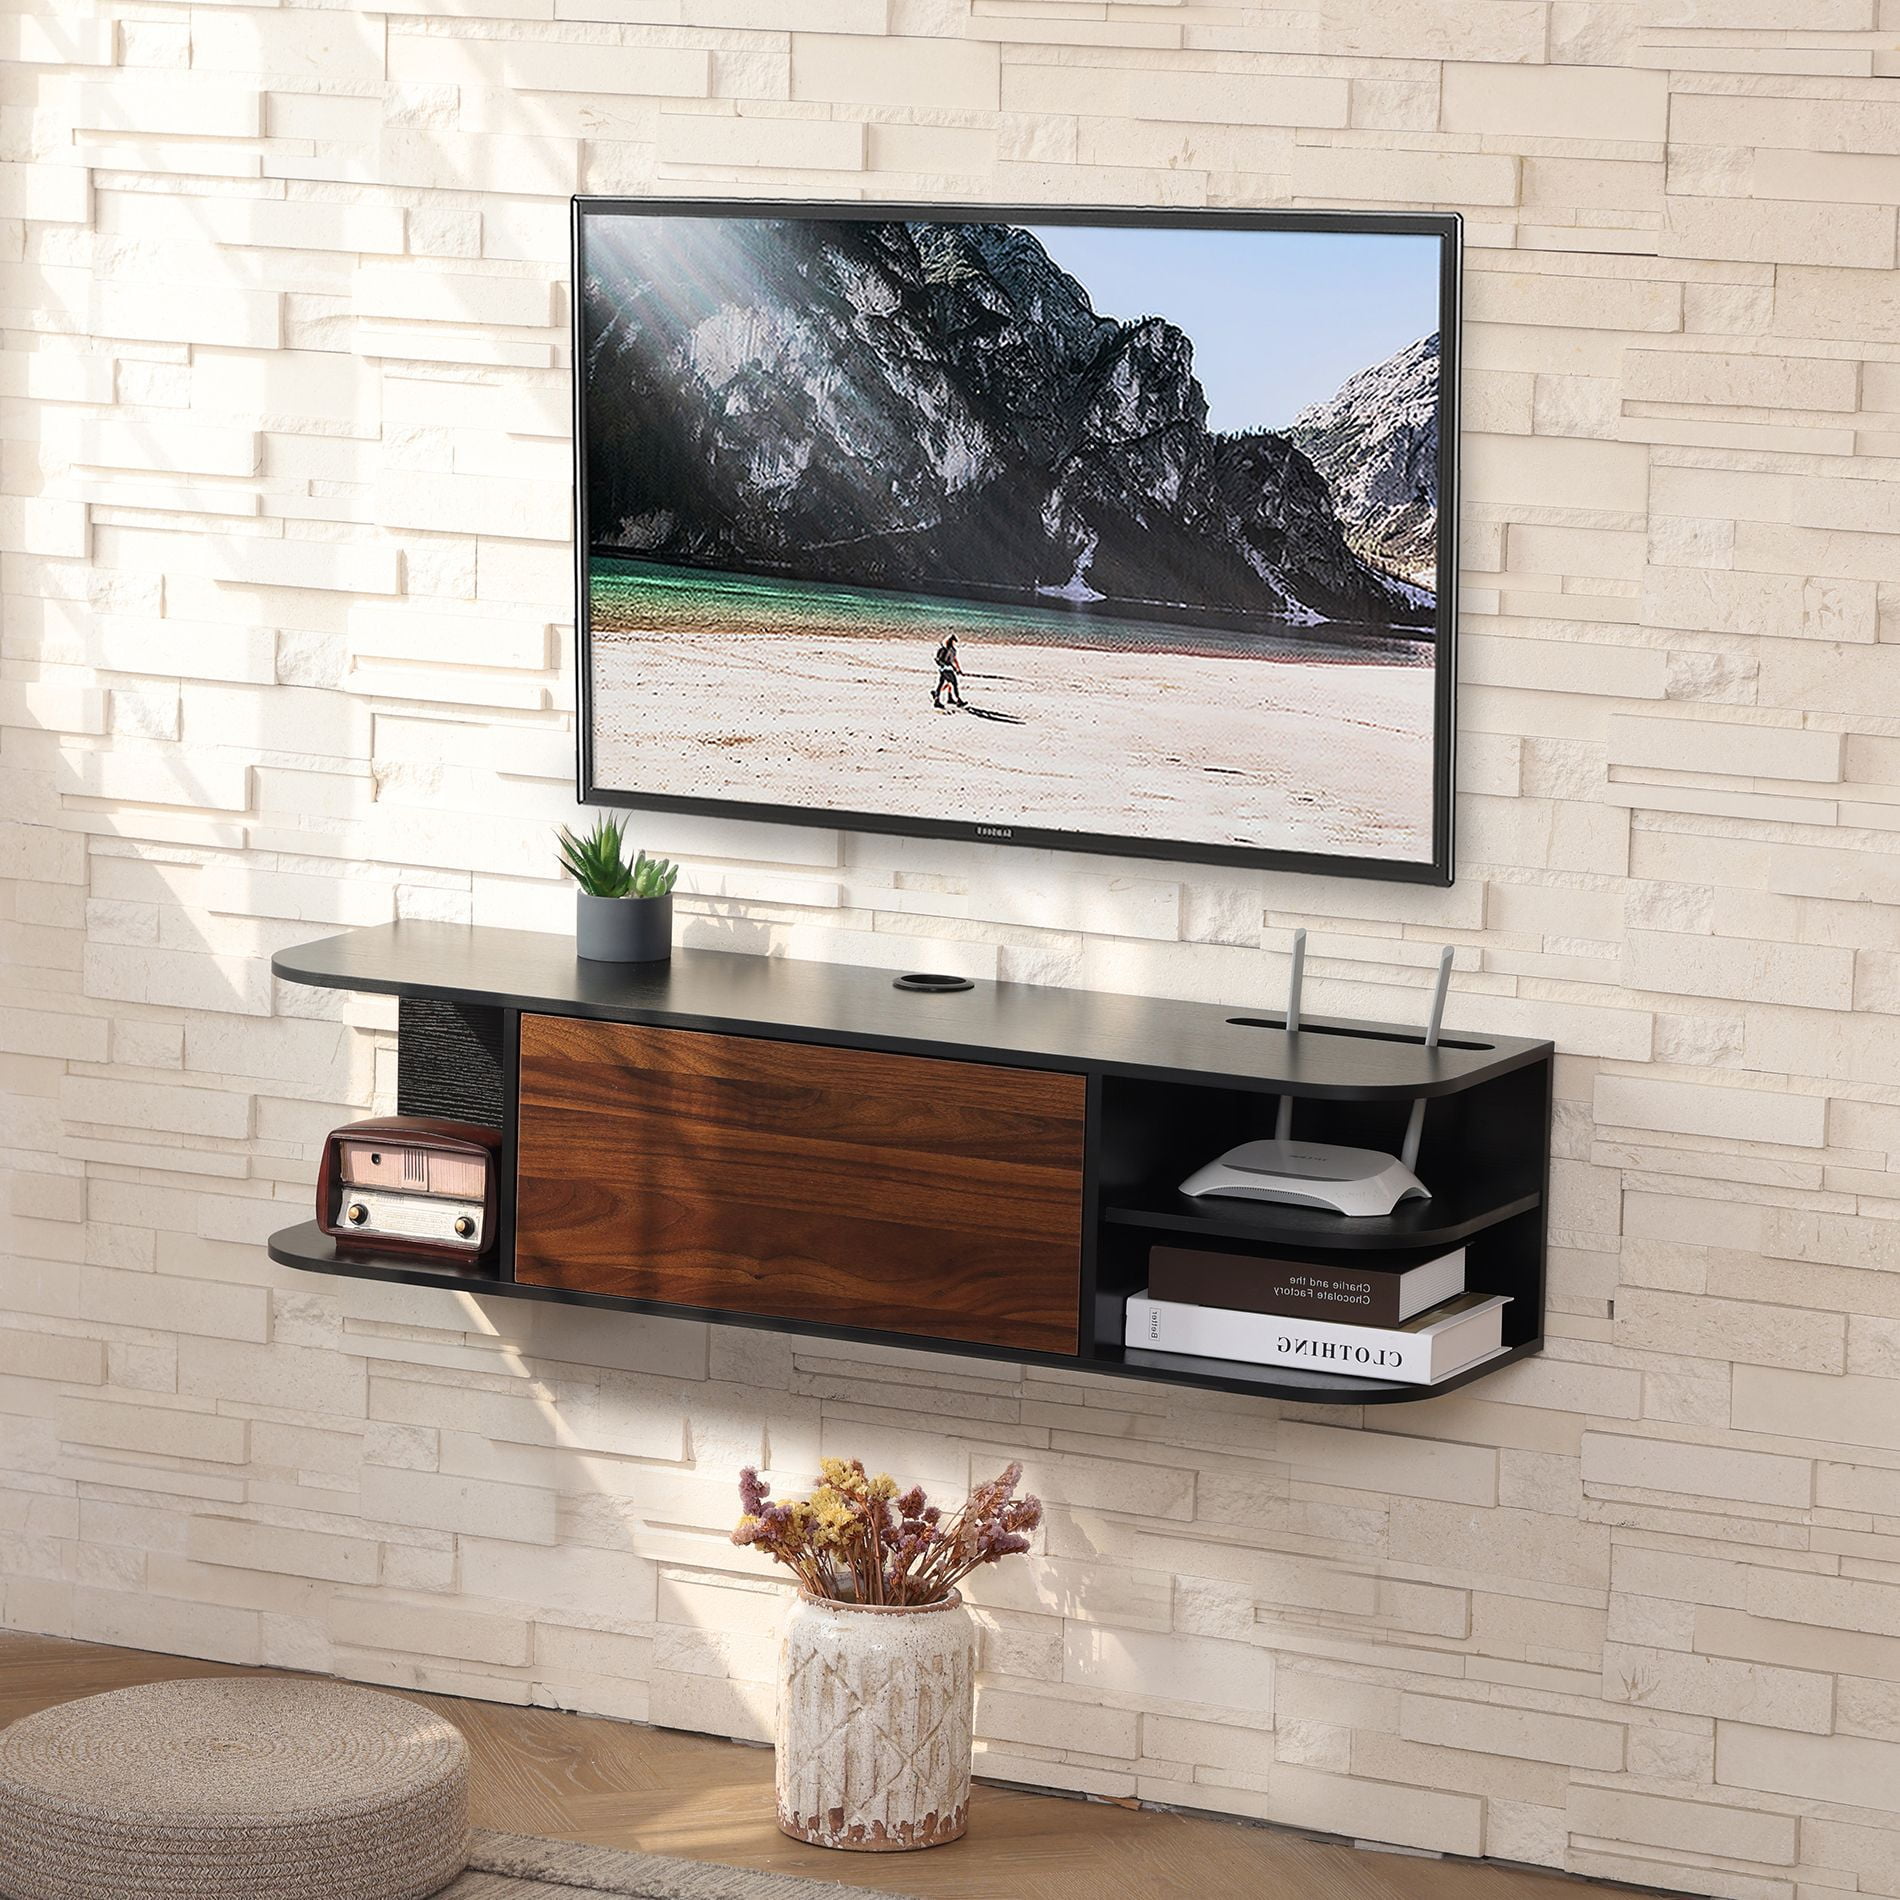 Fitueyes Wood Floating Shelves Media Center TV Stand Wall Mounted A/V Console 